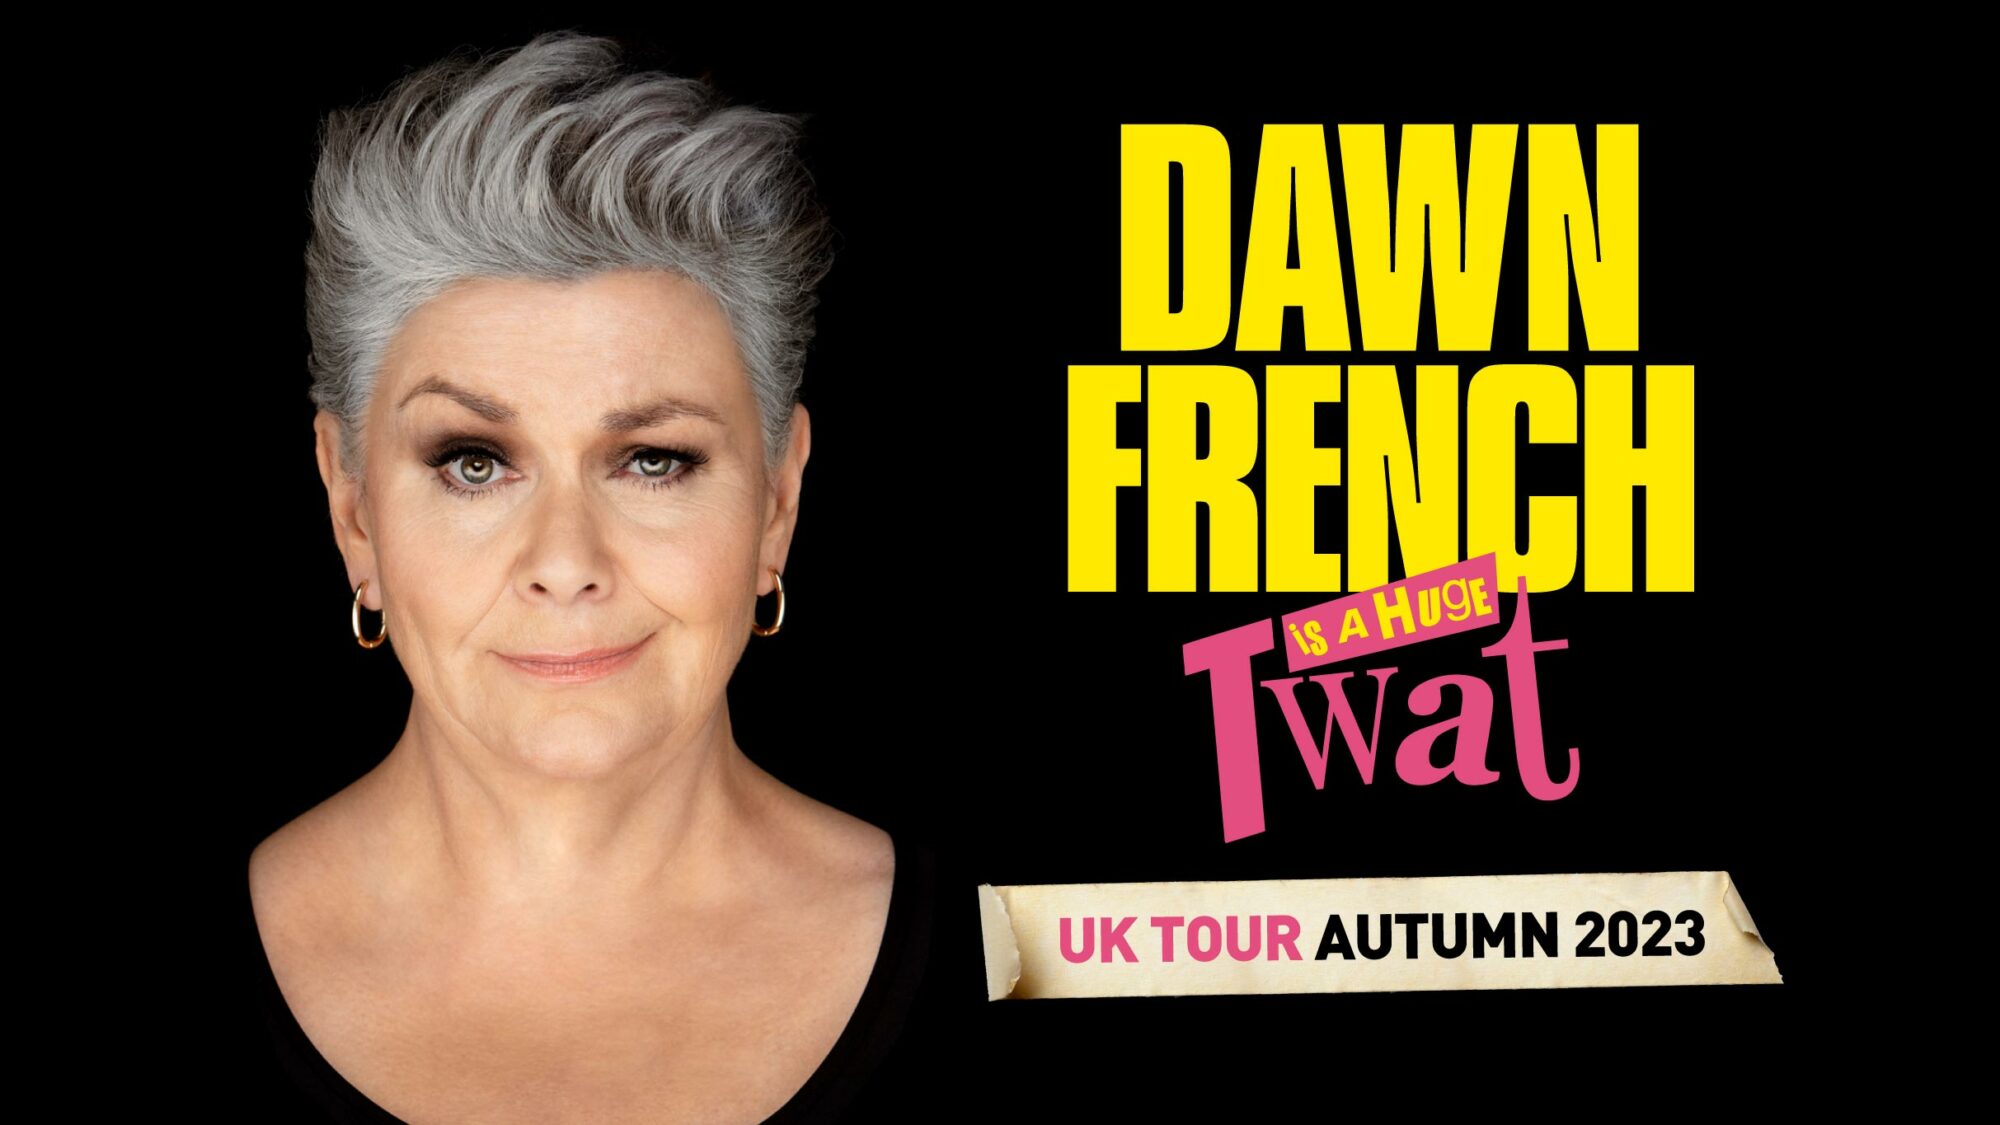 Image name Dawn French at York Barbican York the 1 image from the post Dawn French Is a Huge TW*T at Sheffield City Hall Oval Hall, Sheffield in Yorkshire.com.